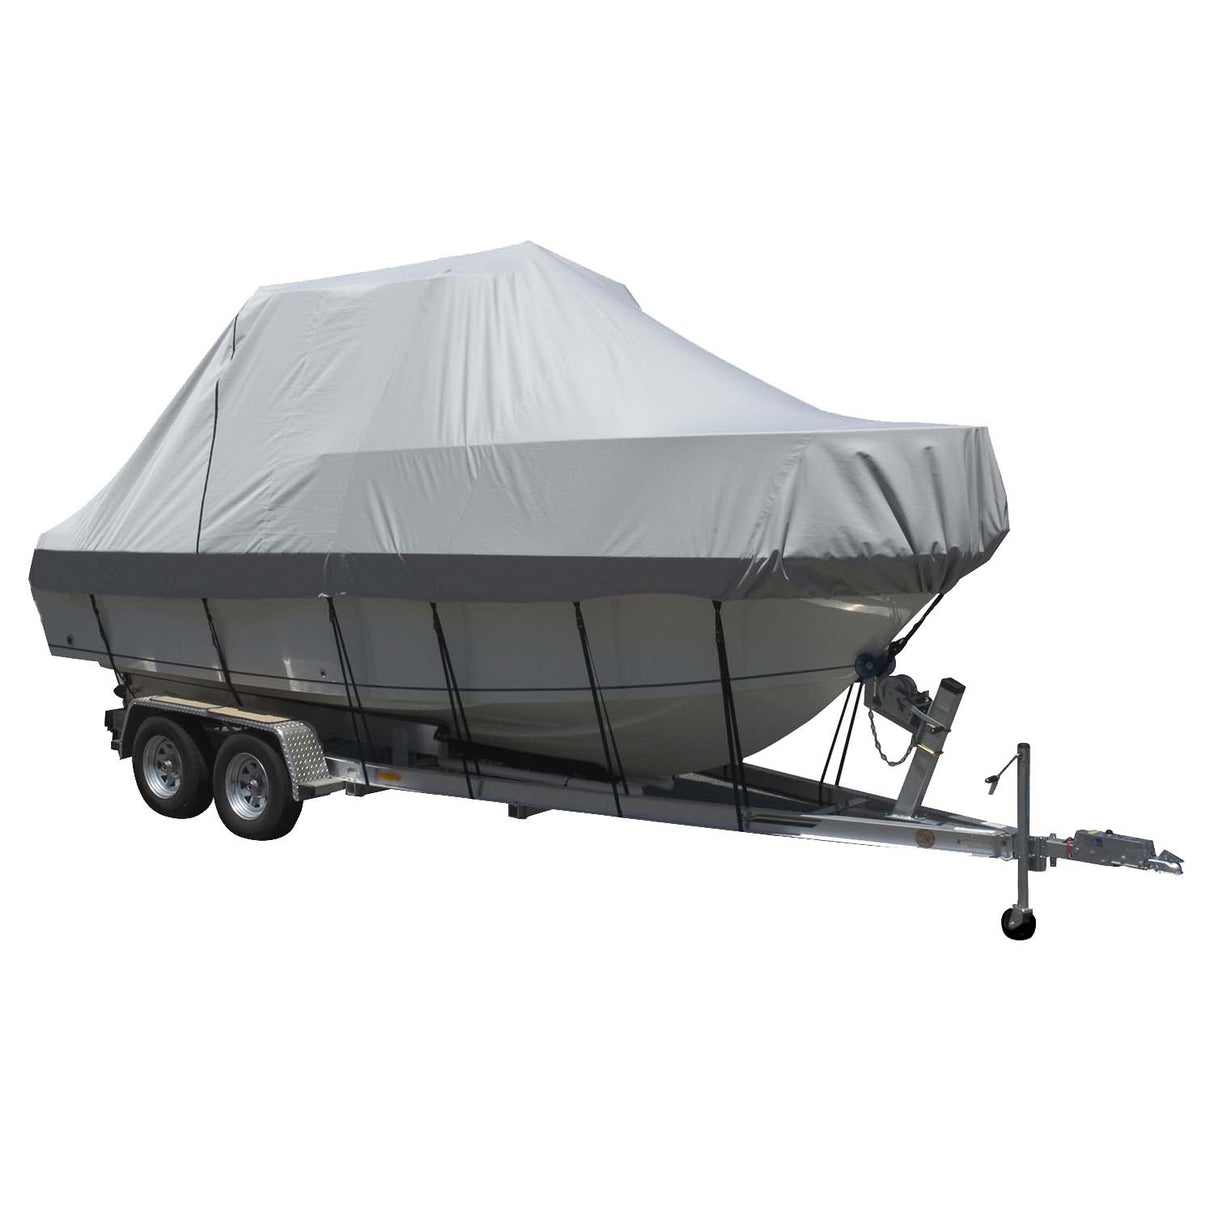 Carver Sun-DURA Specialty Boat Cover f/26.5 Walk Around Cuddy Center Console Boats - Grey - Life Raft Professionals